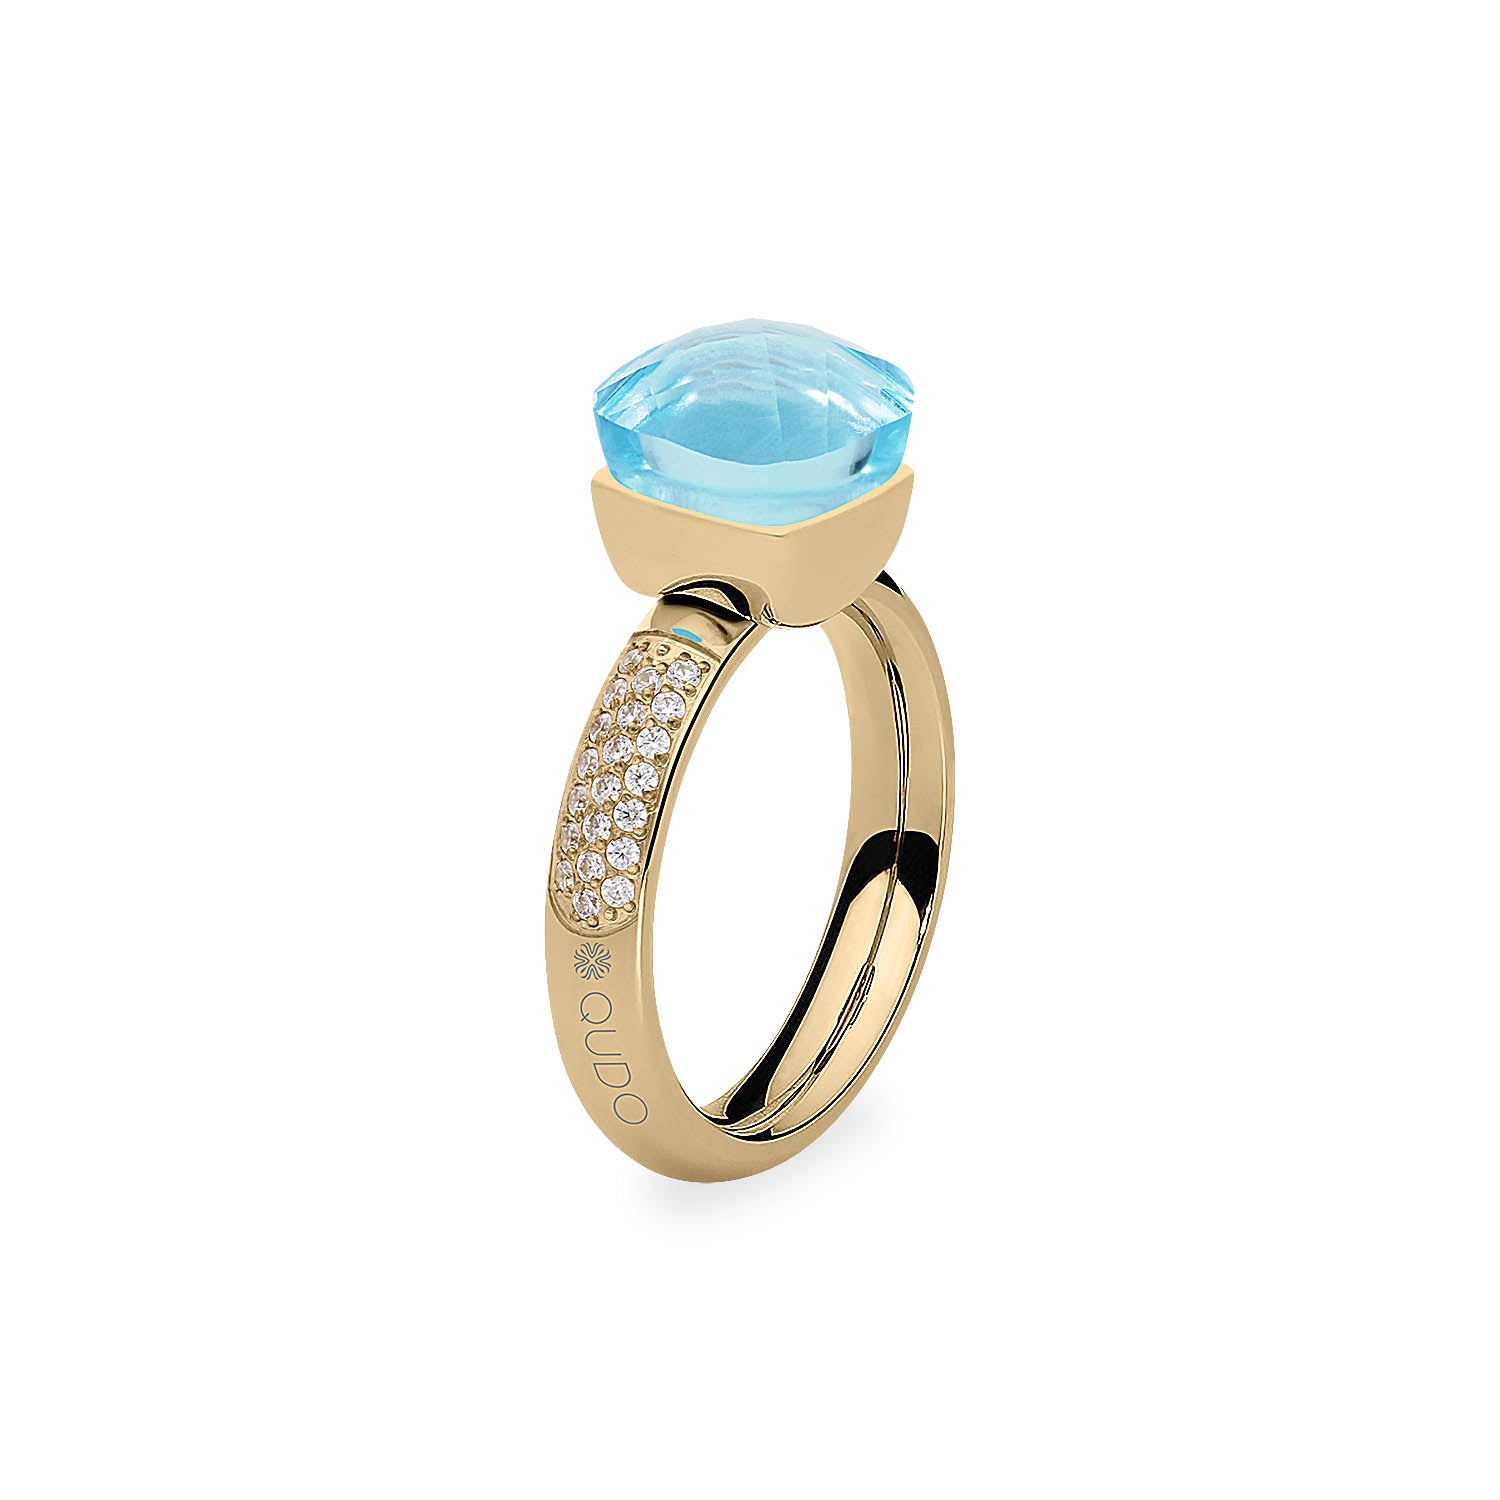 Firenze Deluxe Ring - Shades of Blue - Gold